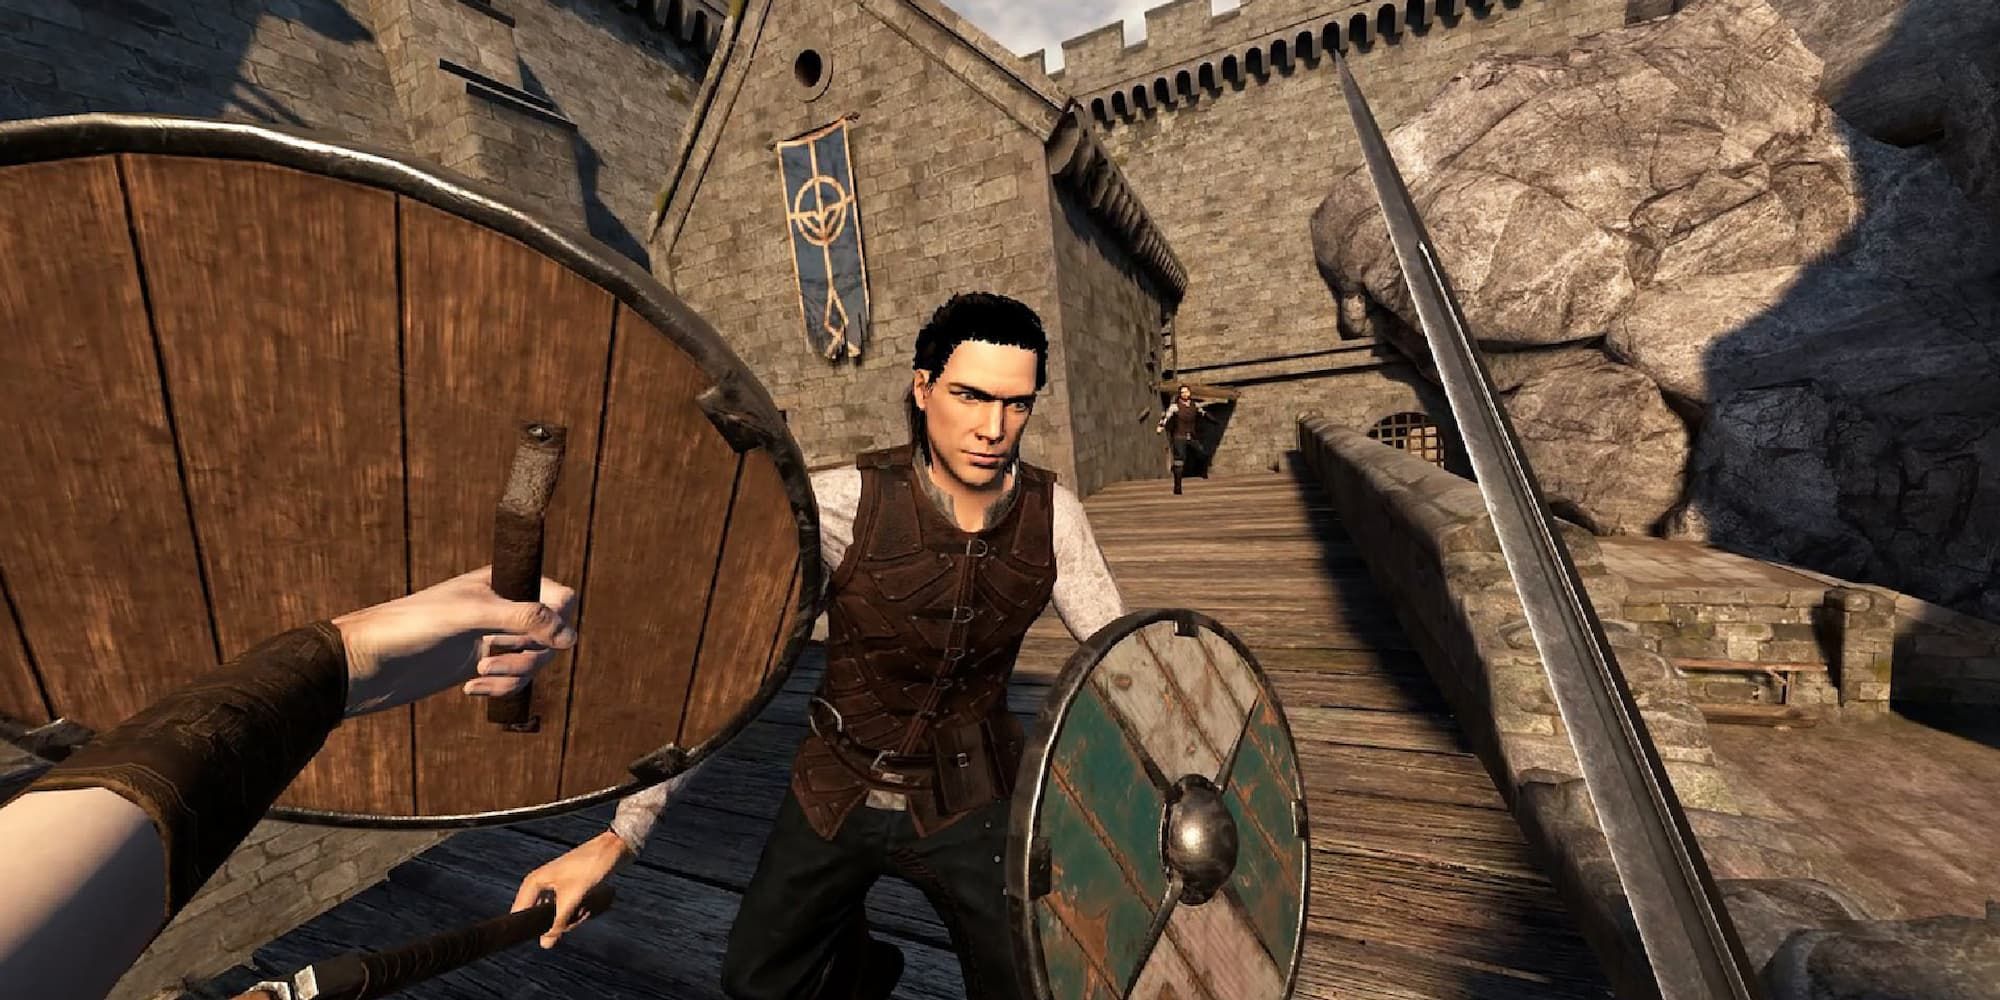 The player fights an enemy with a sword and shield in Blade And Sorcery: Nomad.